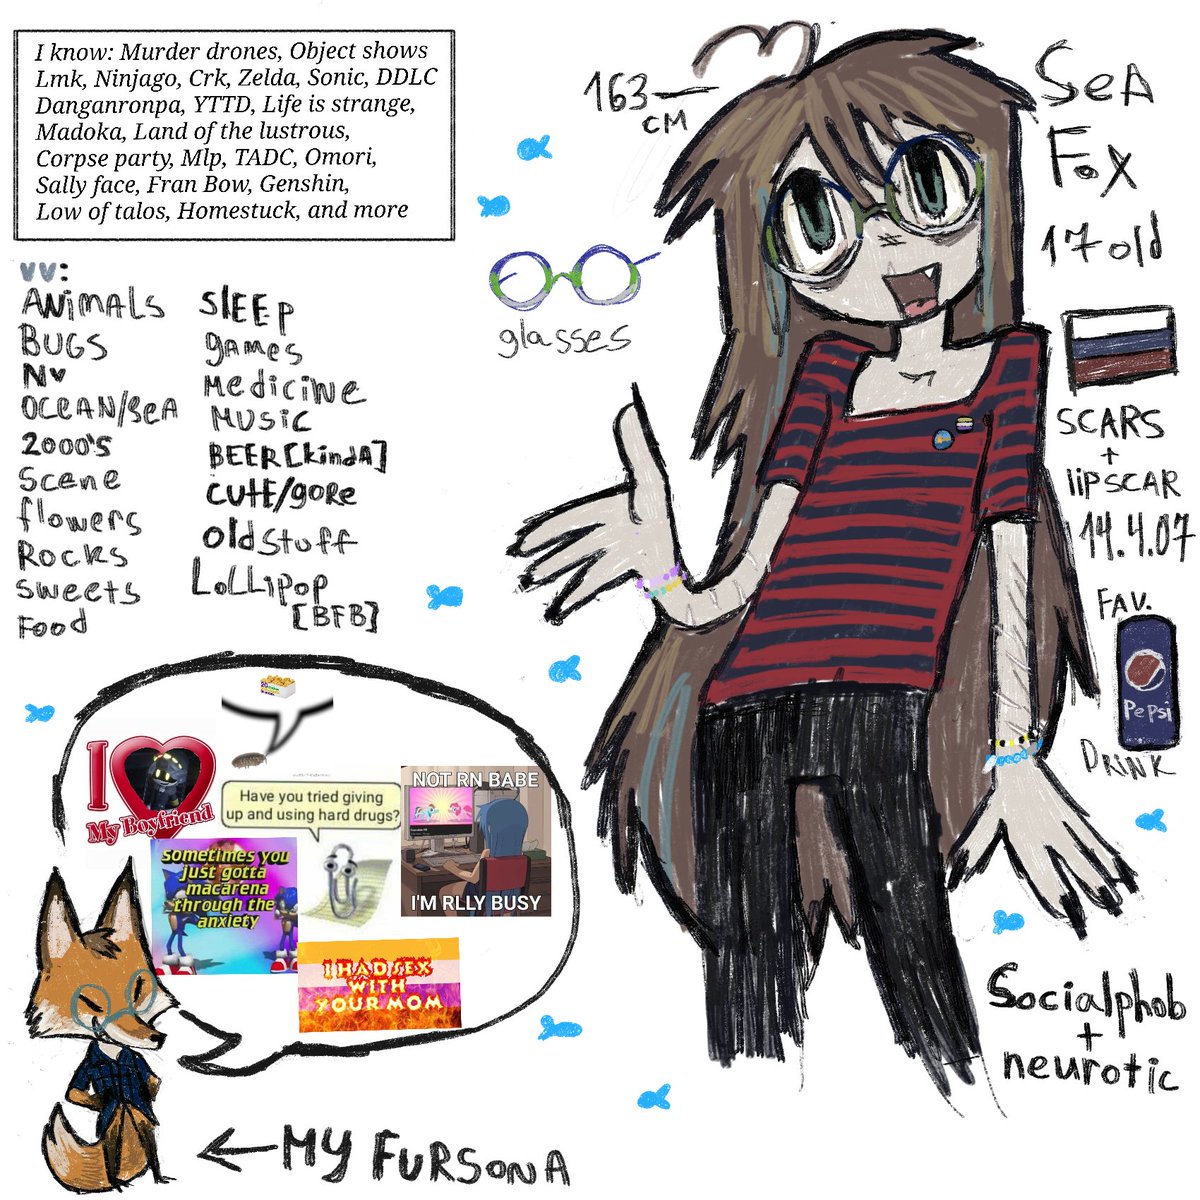 Finally #meettheartist thing or how it call
So yeah it's me hii I draw and being weird 🪼